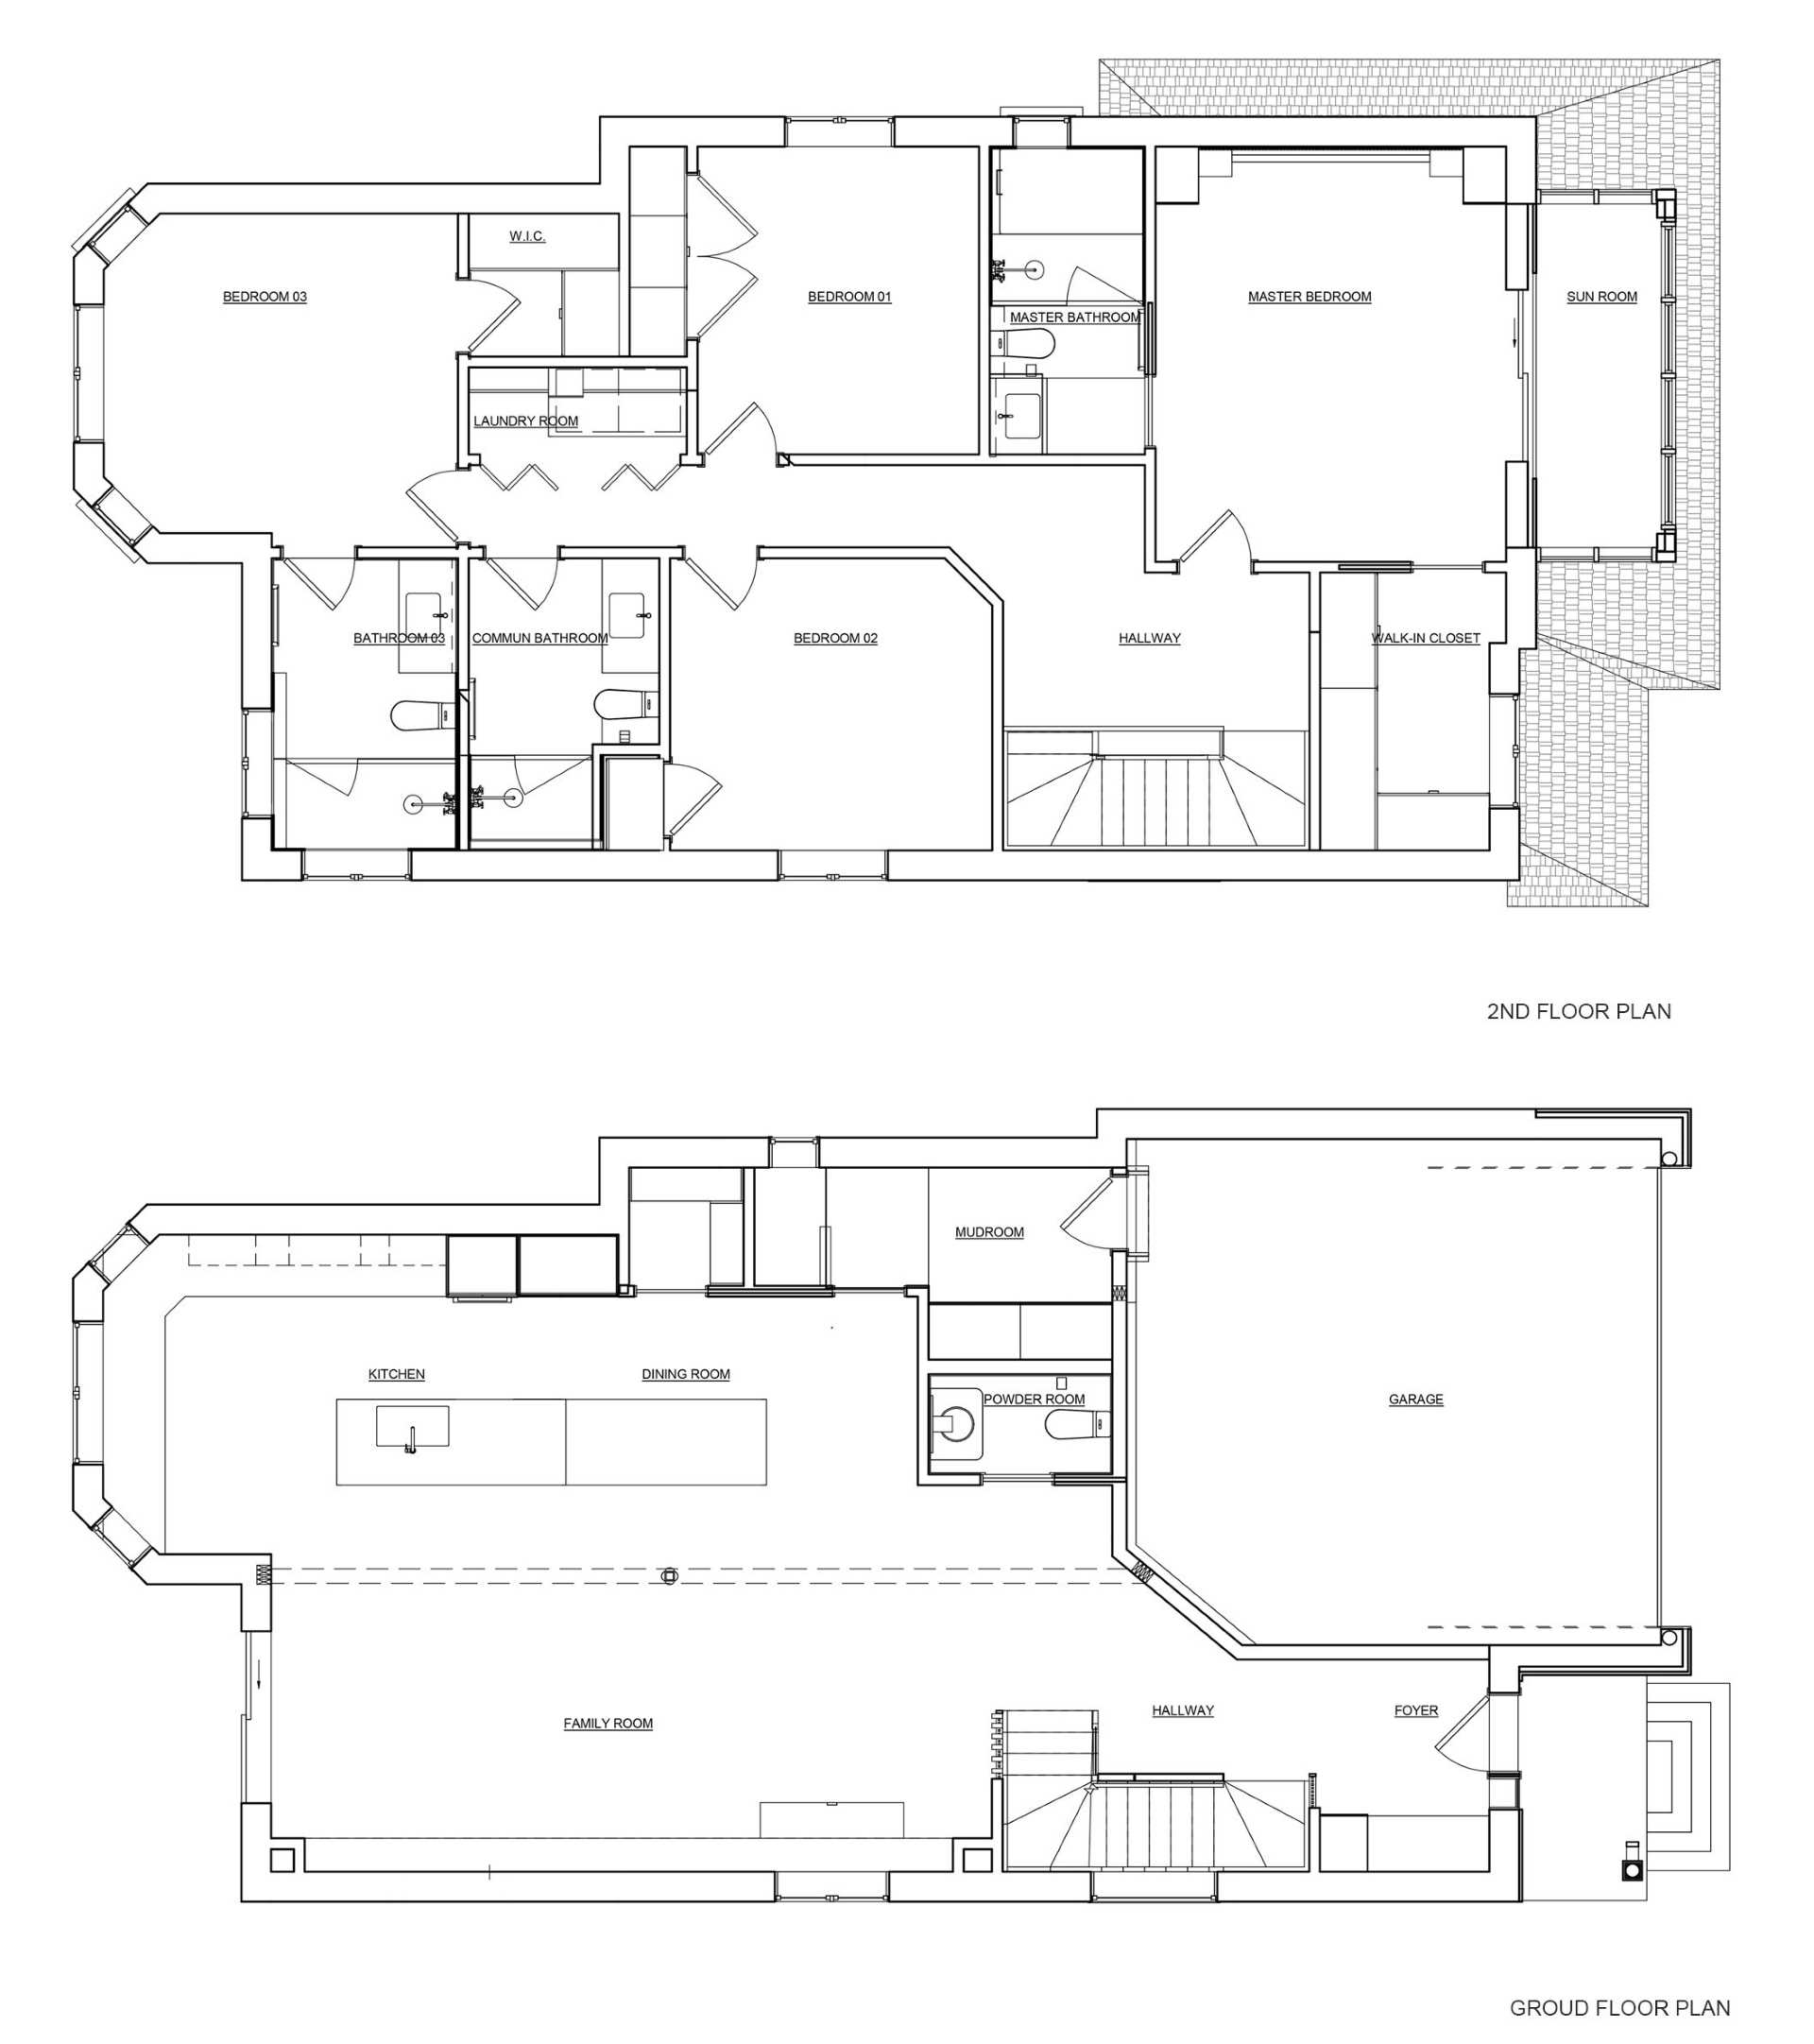 The floor plan of a two-storey home.